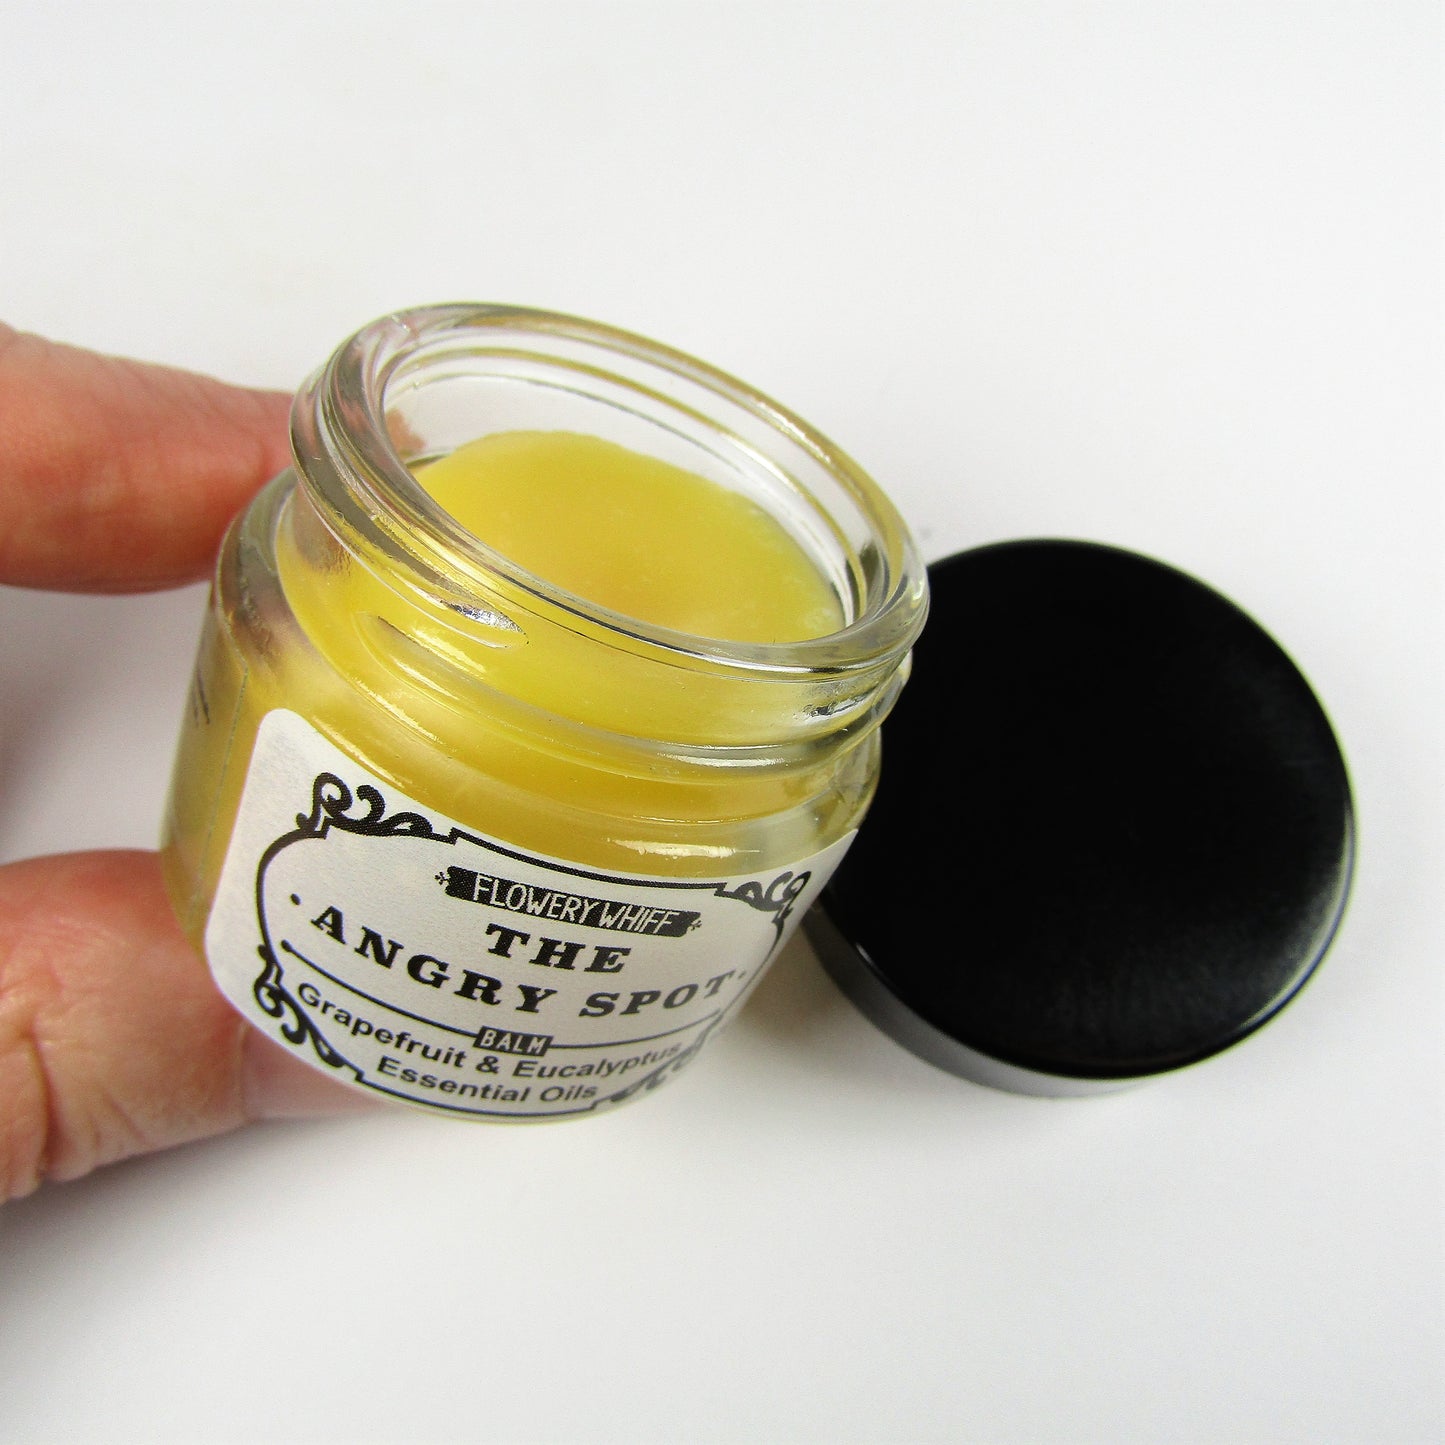 The Angry Spot Soothing Balm